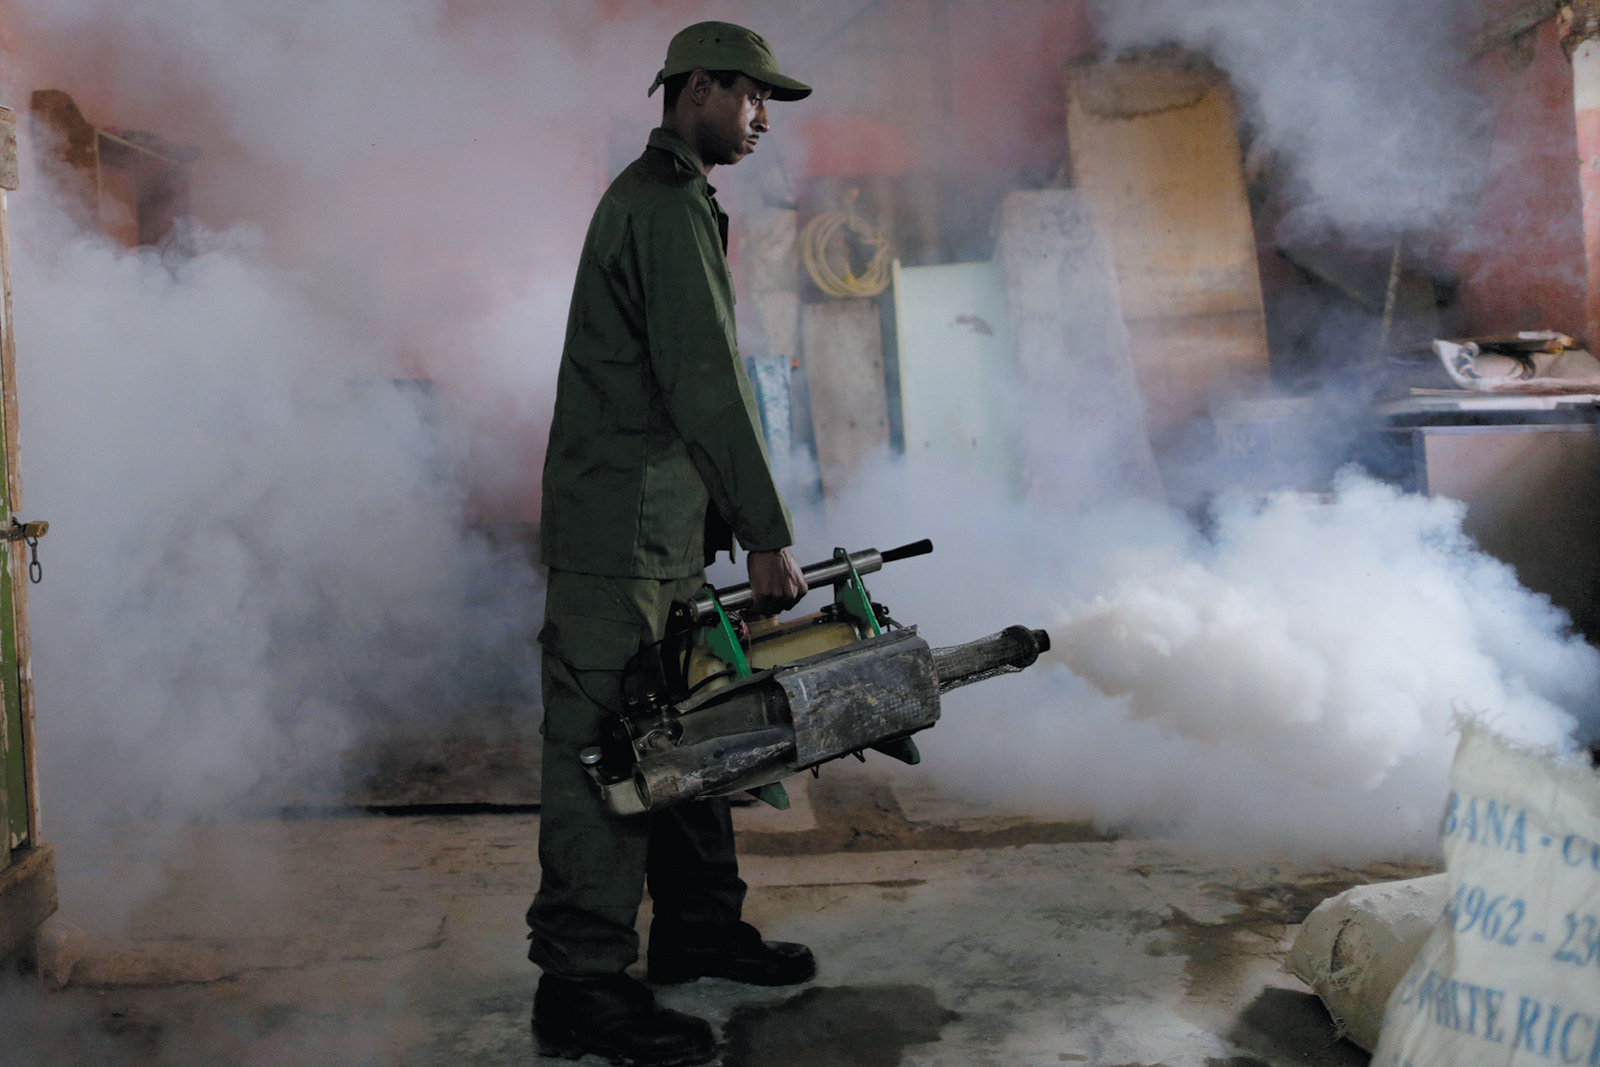 A military reservist fumigating a house as a preventive measure against the Zika virus and other mosquito-borne diseases, Havana, Cuba, March 2016